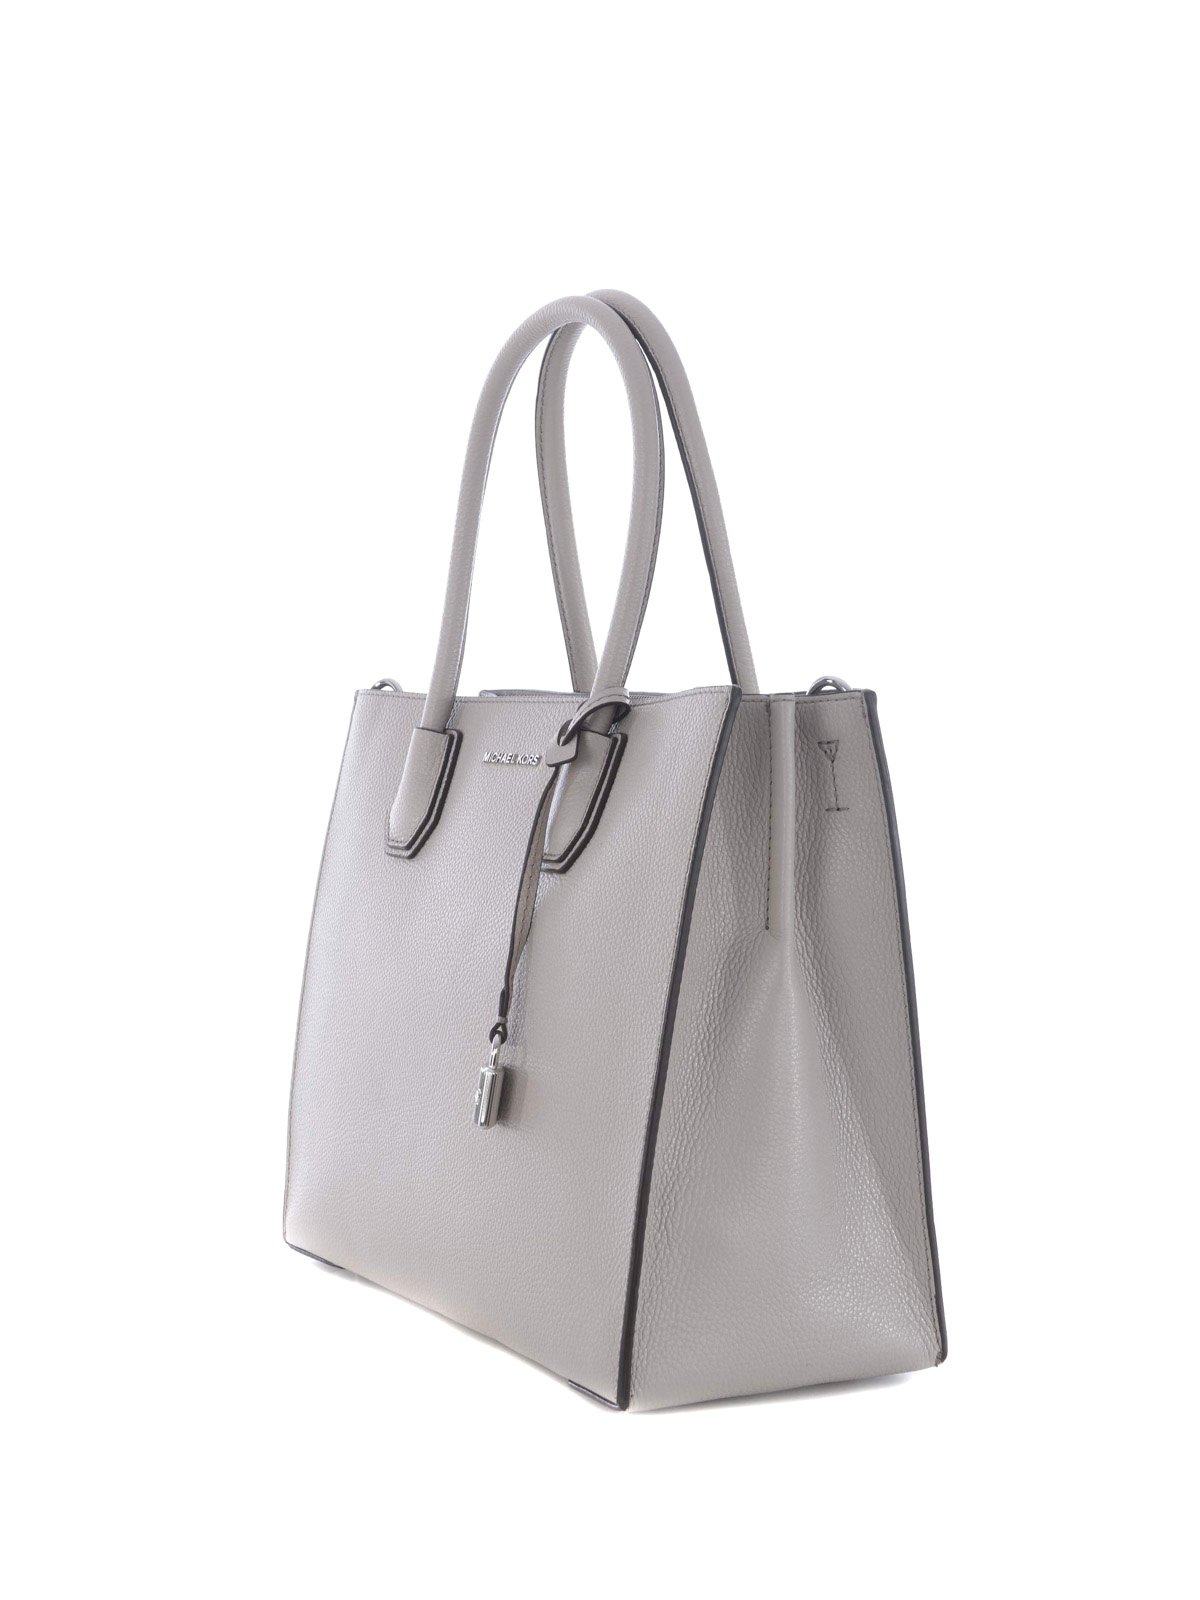 Michael Kors Mercer Large Bonded Leather Tote - Cement 30F6SM9T3L